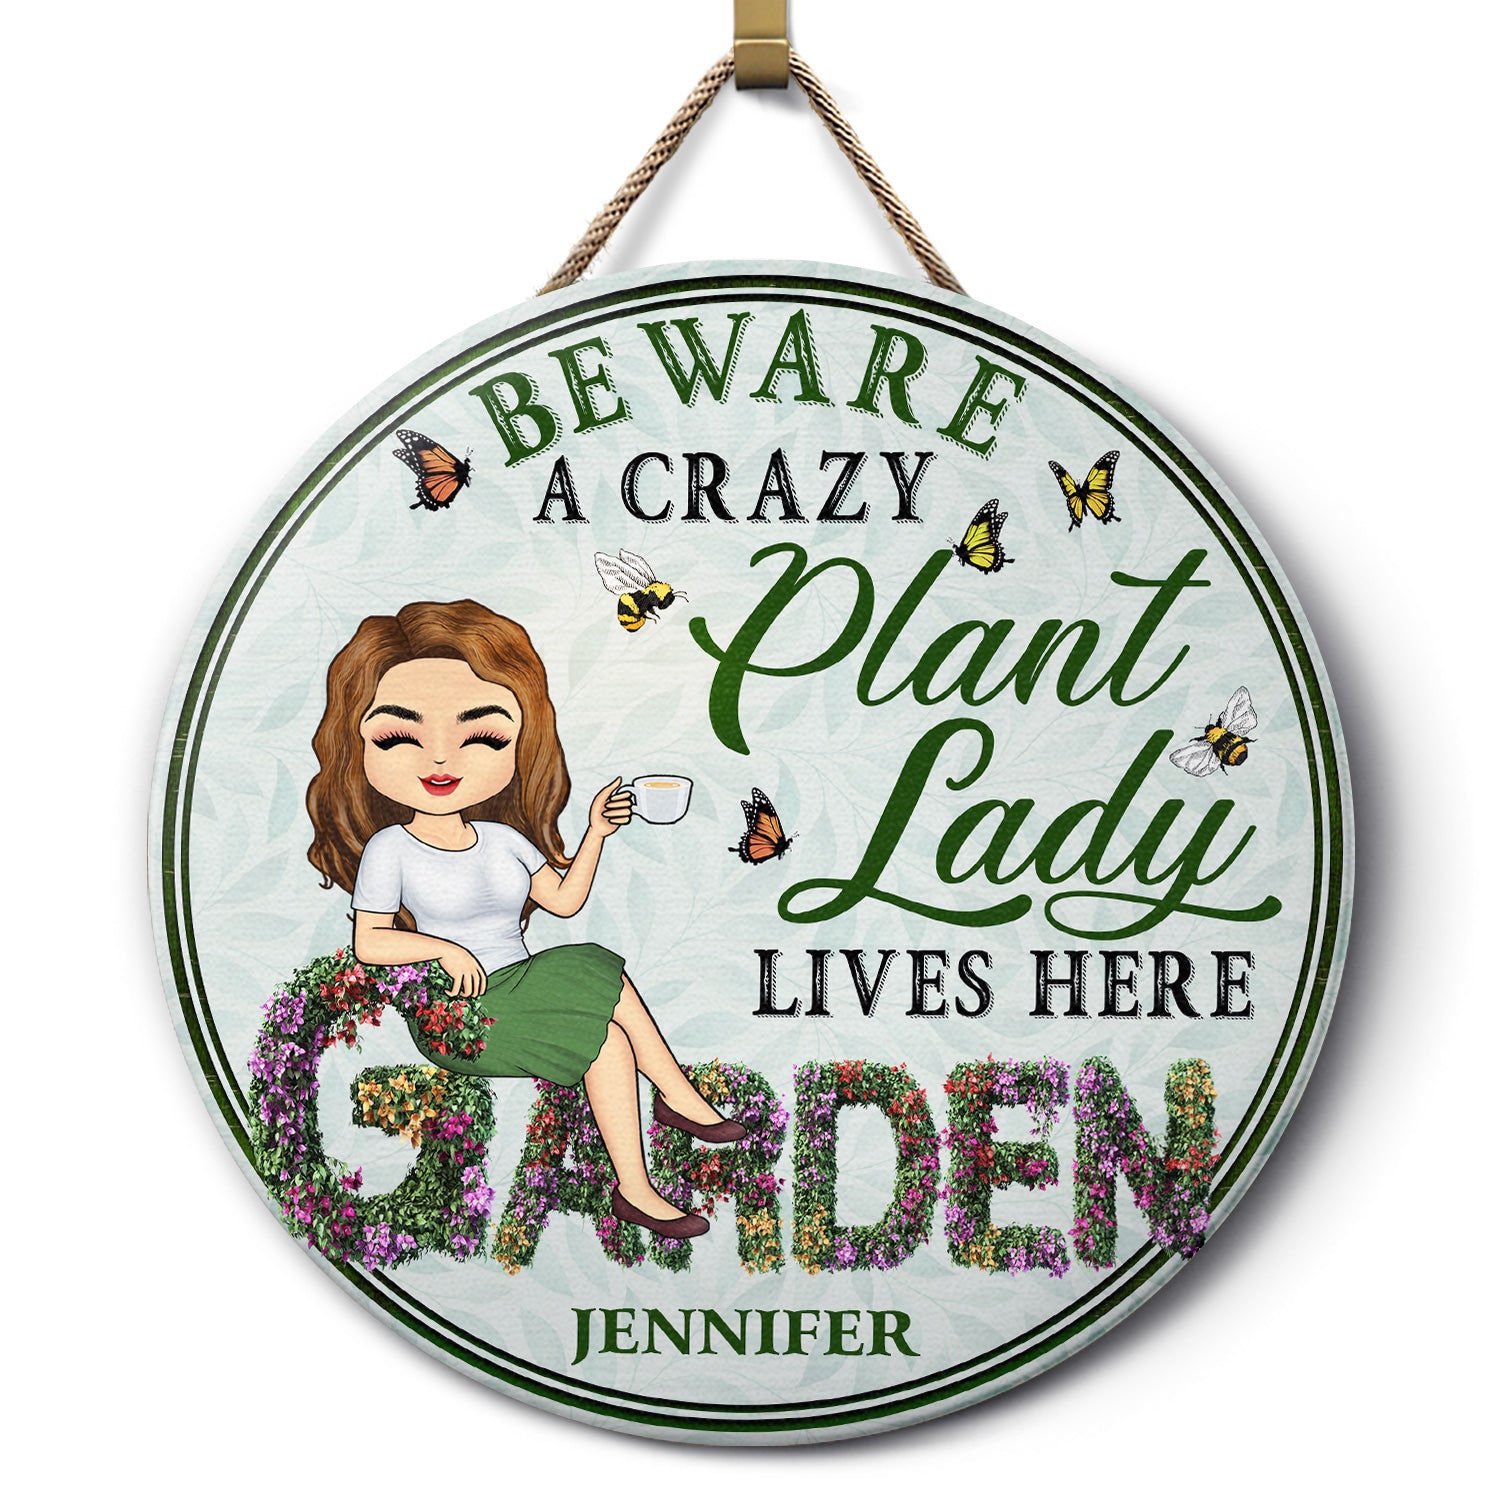 And Into The Garden I Go - Beware A Crazy Plant Lady Lives Here - Birthday, Housewarming Gift For Her, Him, Gardener, Outdoor Decor - Personalized Custom Wood Circle Sign